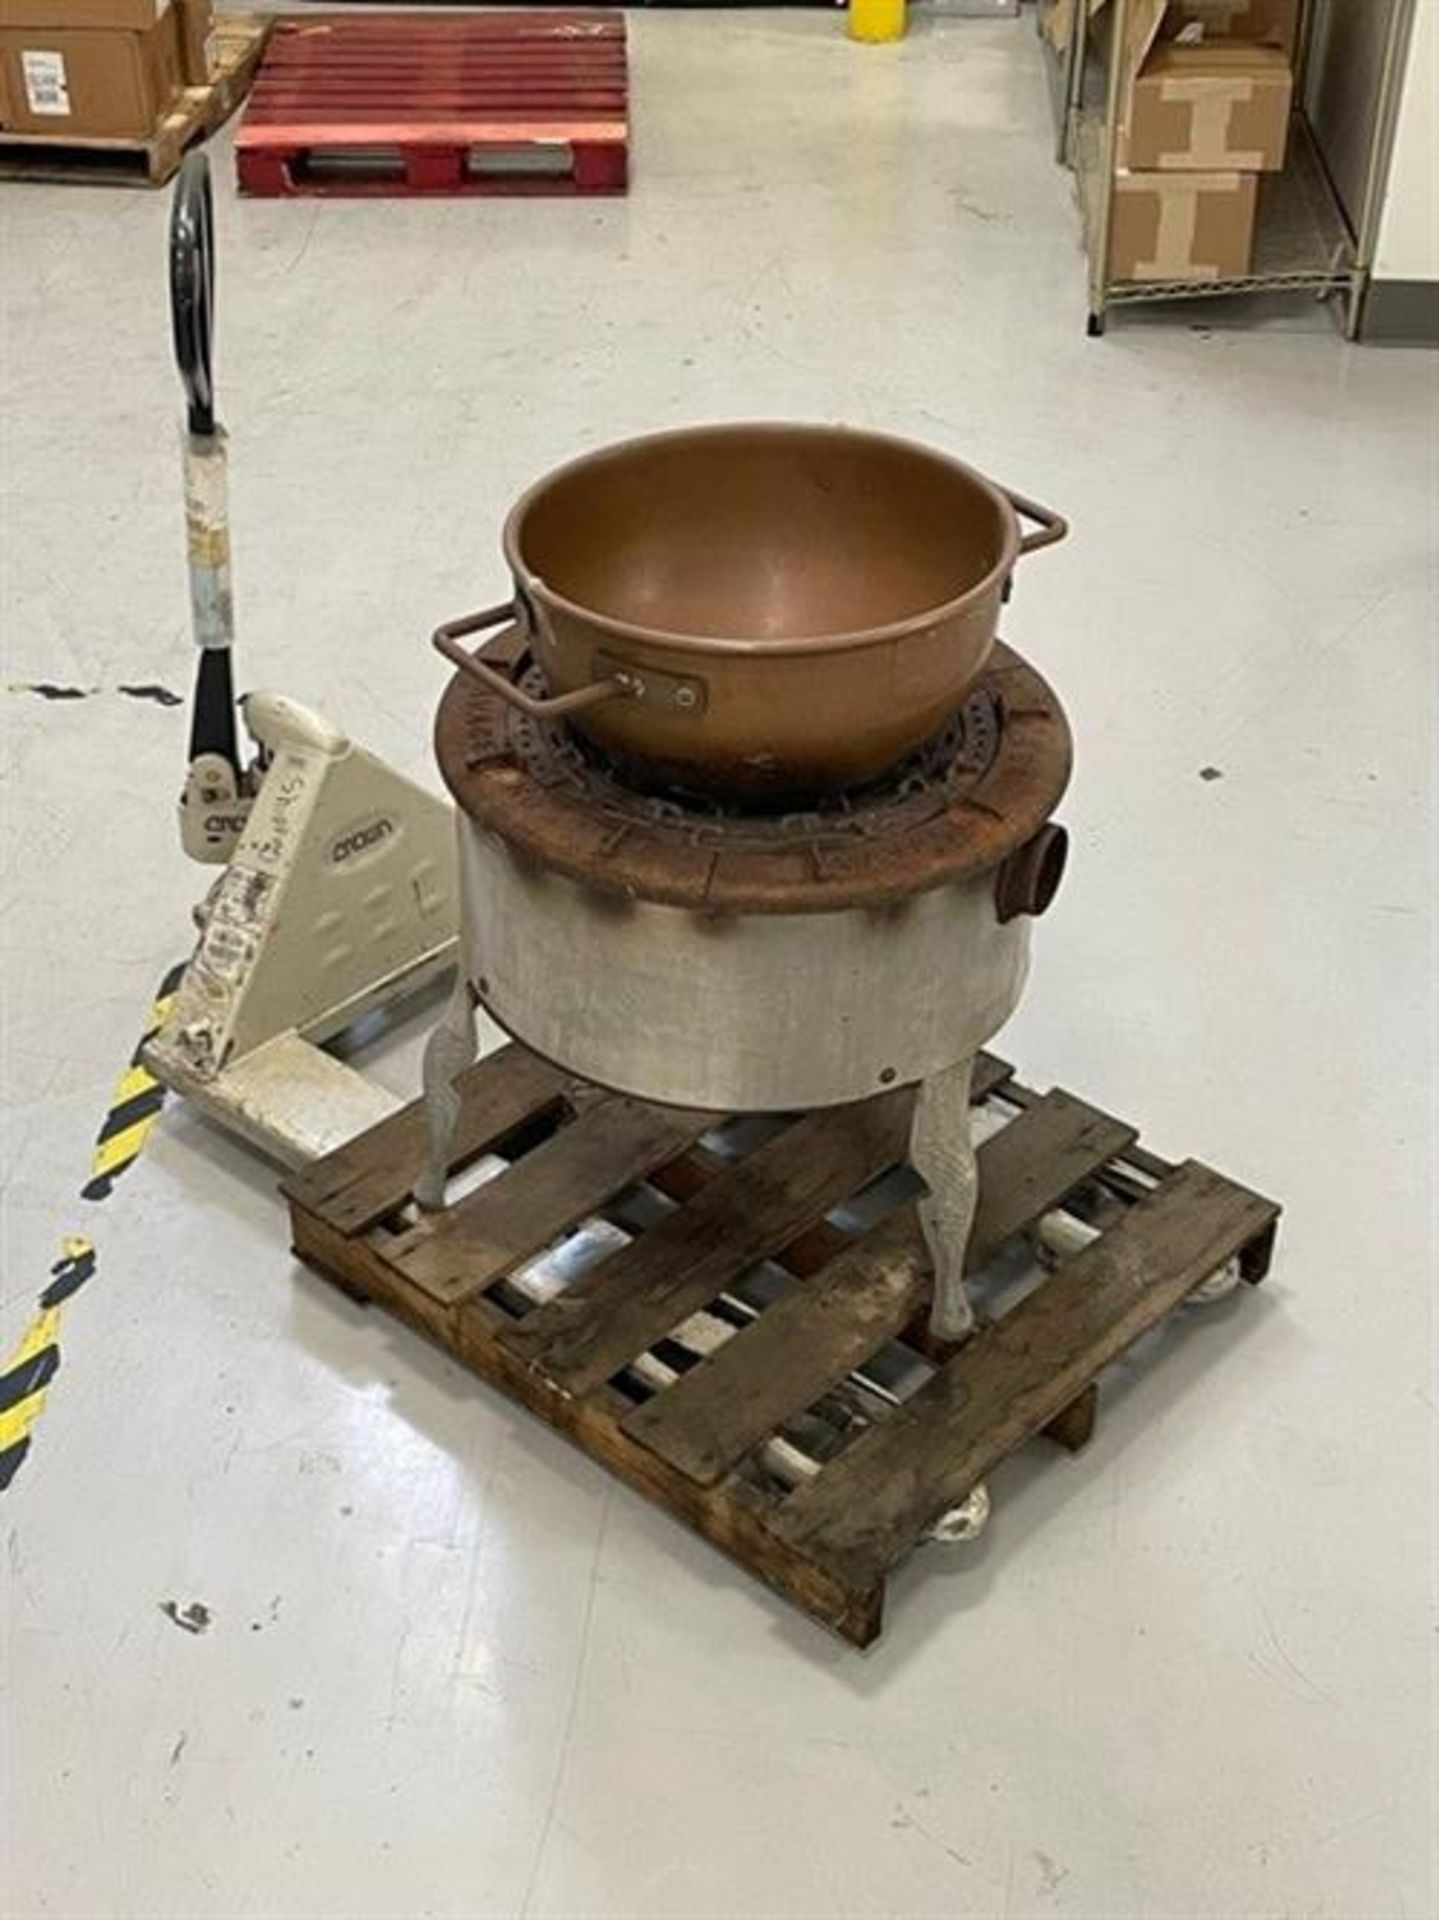 Savage # 20 Gas Fired Stove - Serial number 660 - Set for LP - Copper pot 20" x 14" deep - Rigging/ - Image 5 of 6